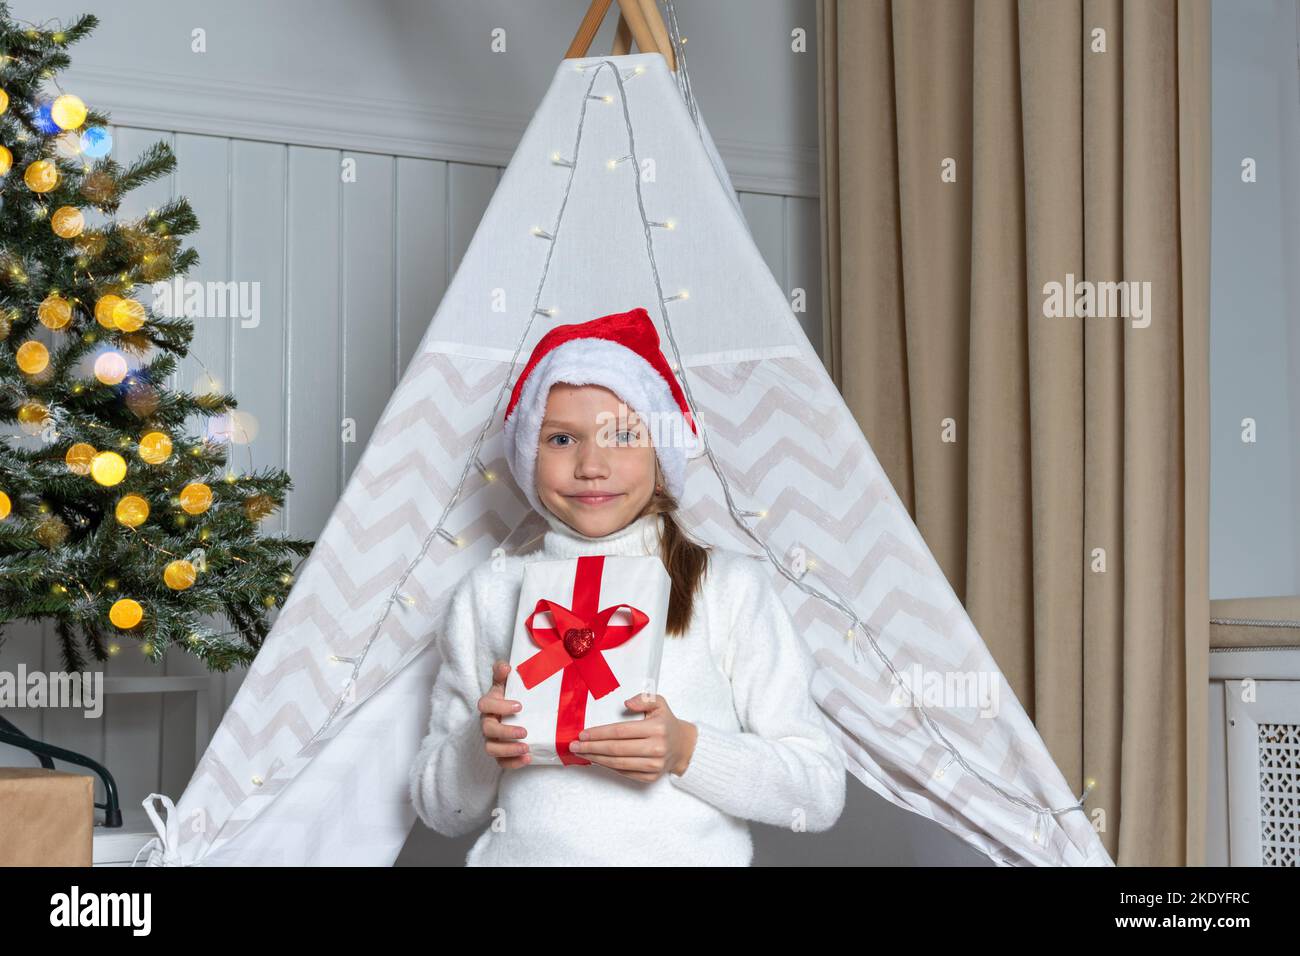 A pretty girl in a Santa hat holds her gifts for Christmas New Year lying in a children's room decorated with garlands. Christmas gifts for children. Stock Photo